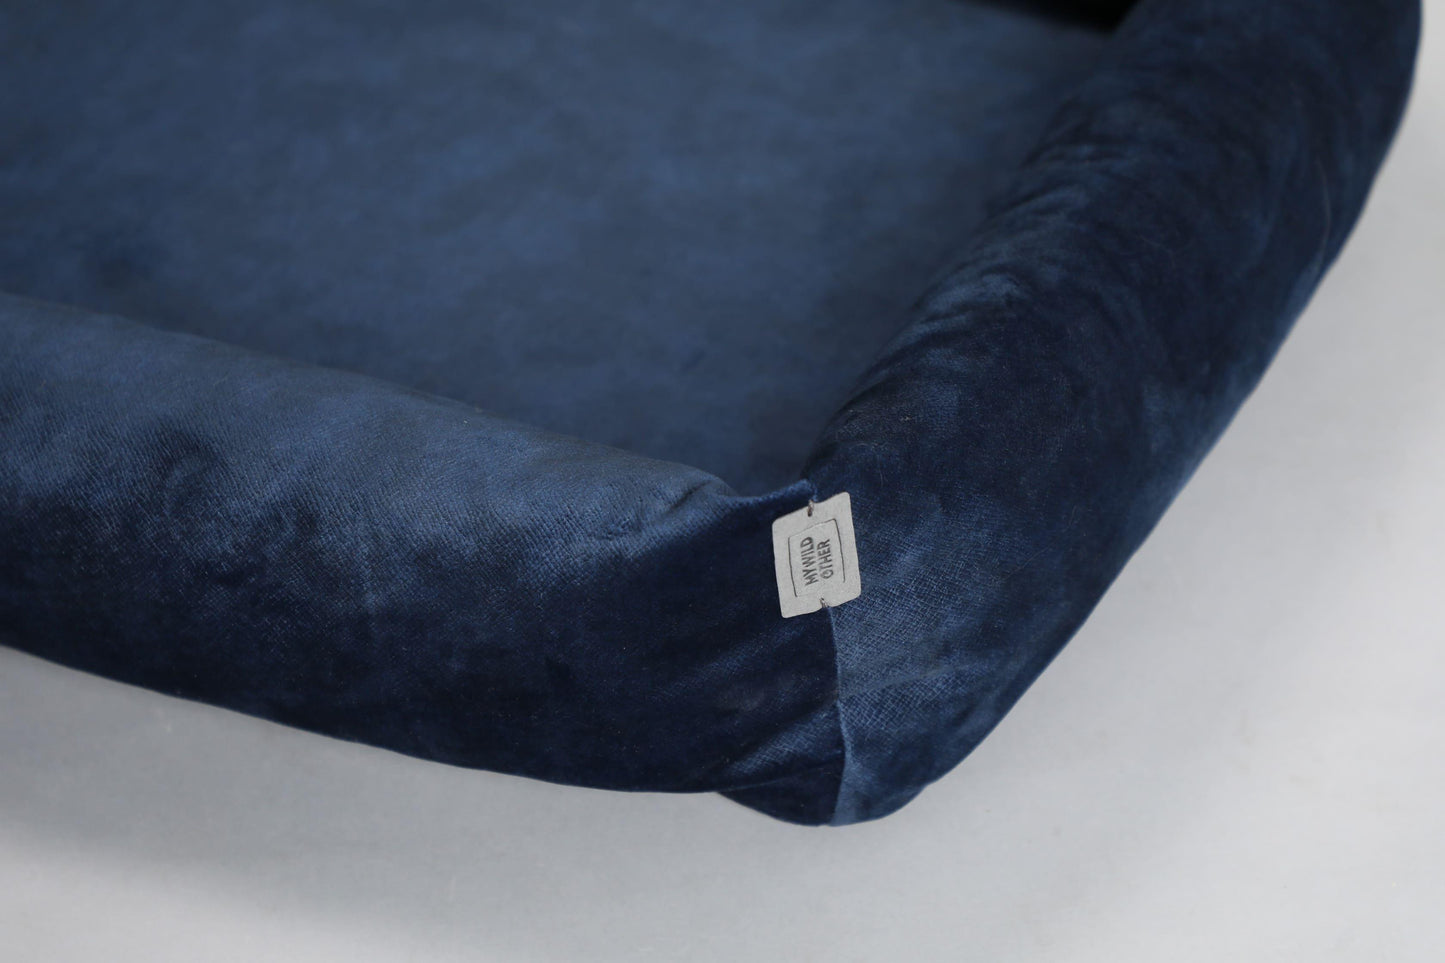 Premium dog bed with sides | 2-sided | ROYAL BLUE - premium dog goods handmade in Europe by animalistus